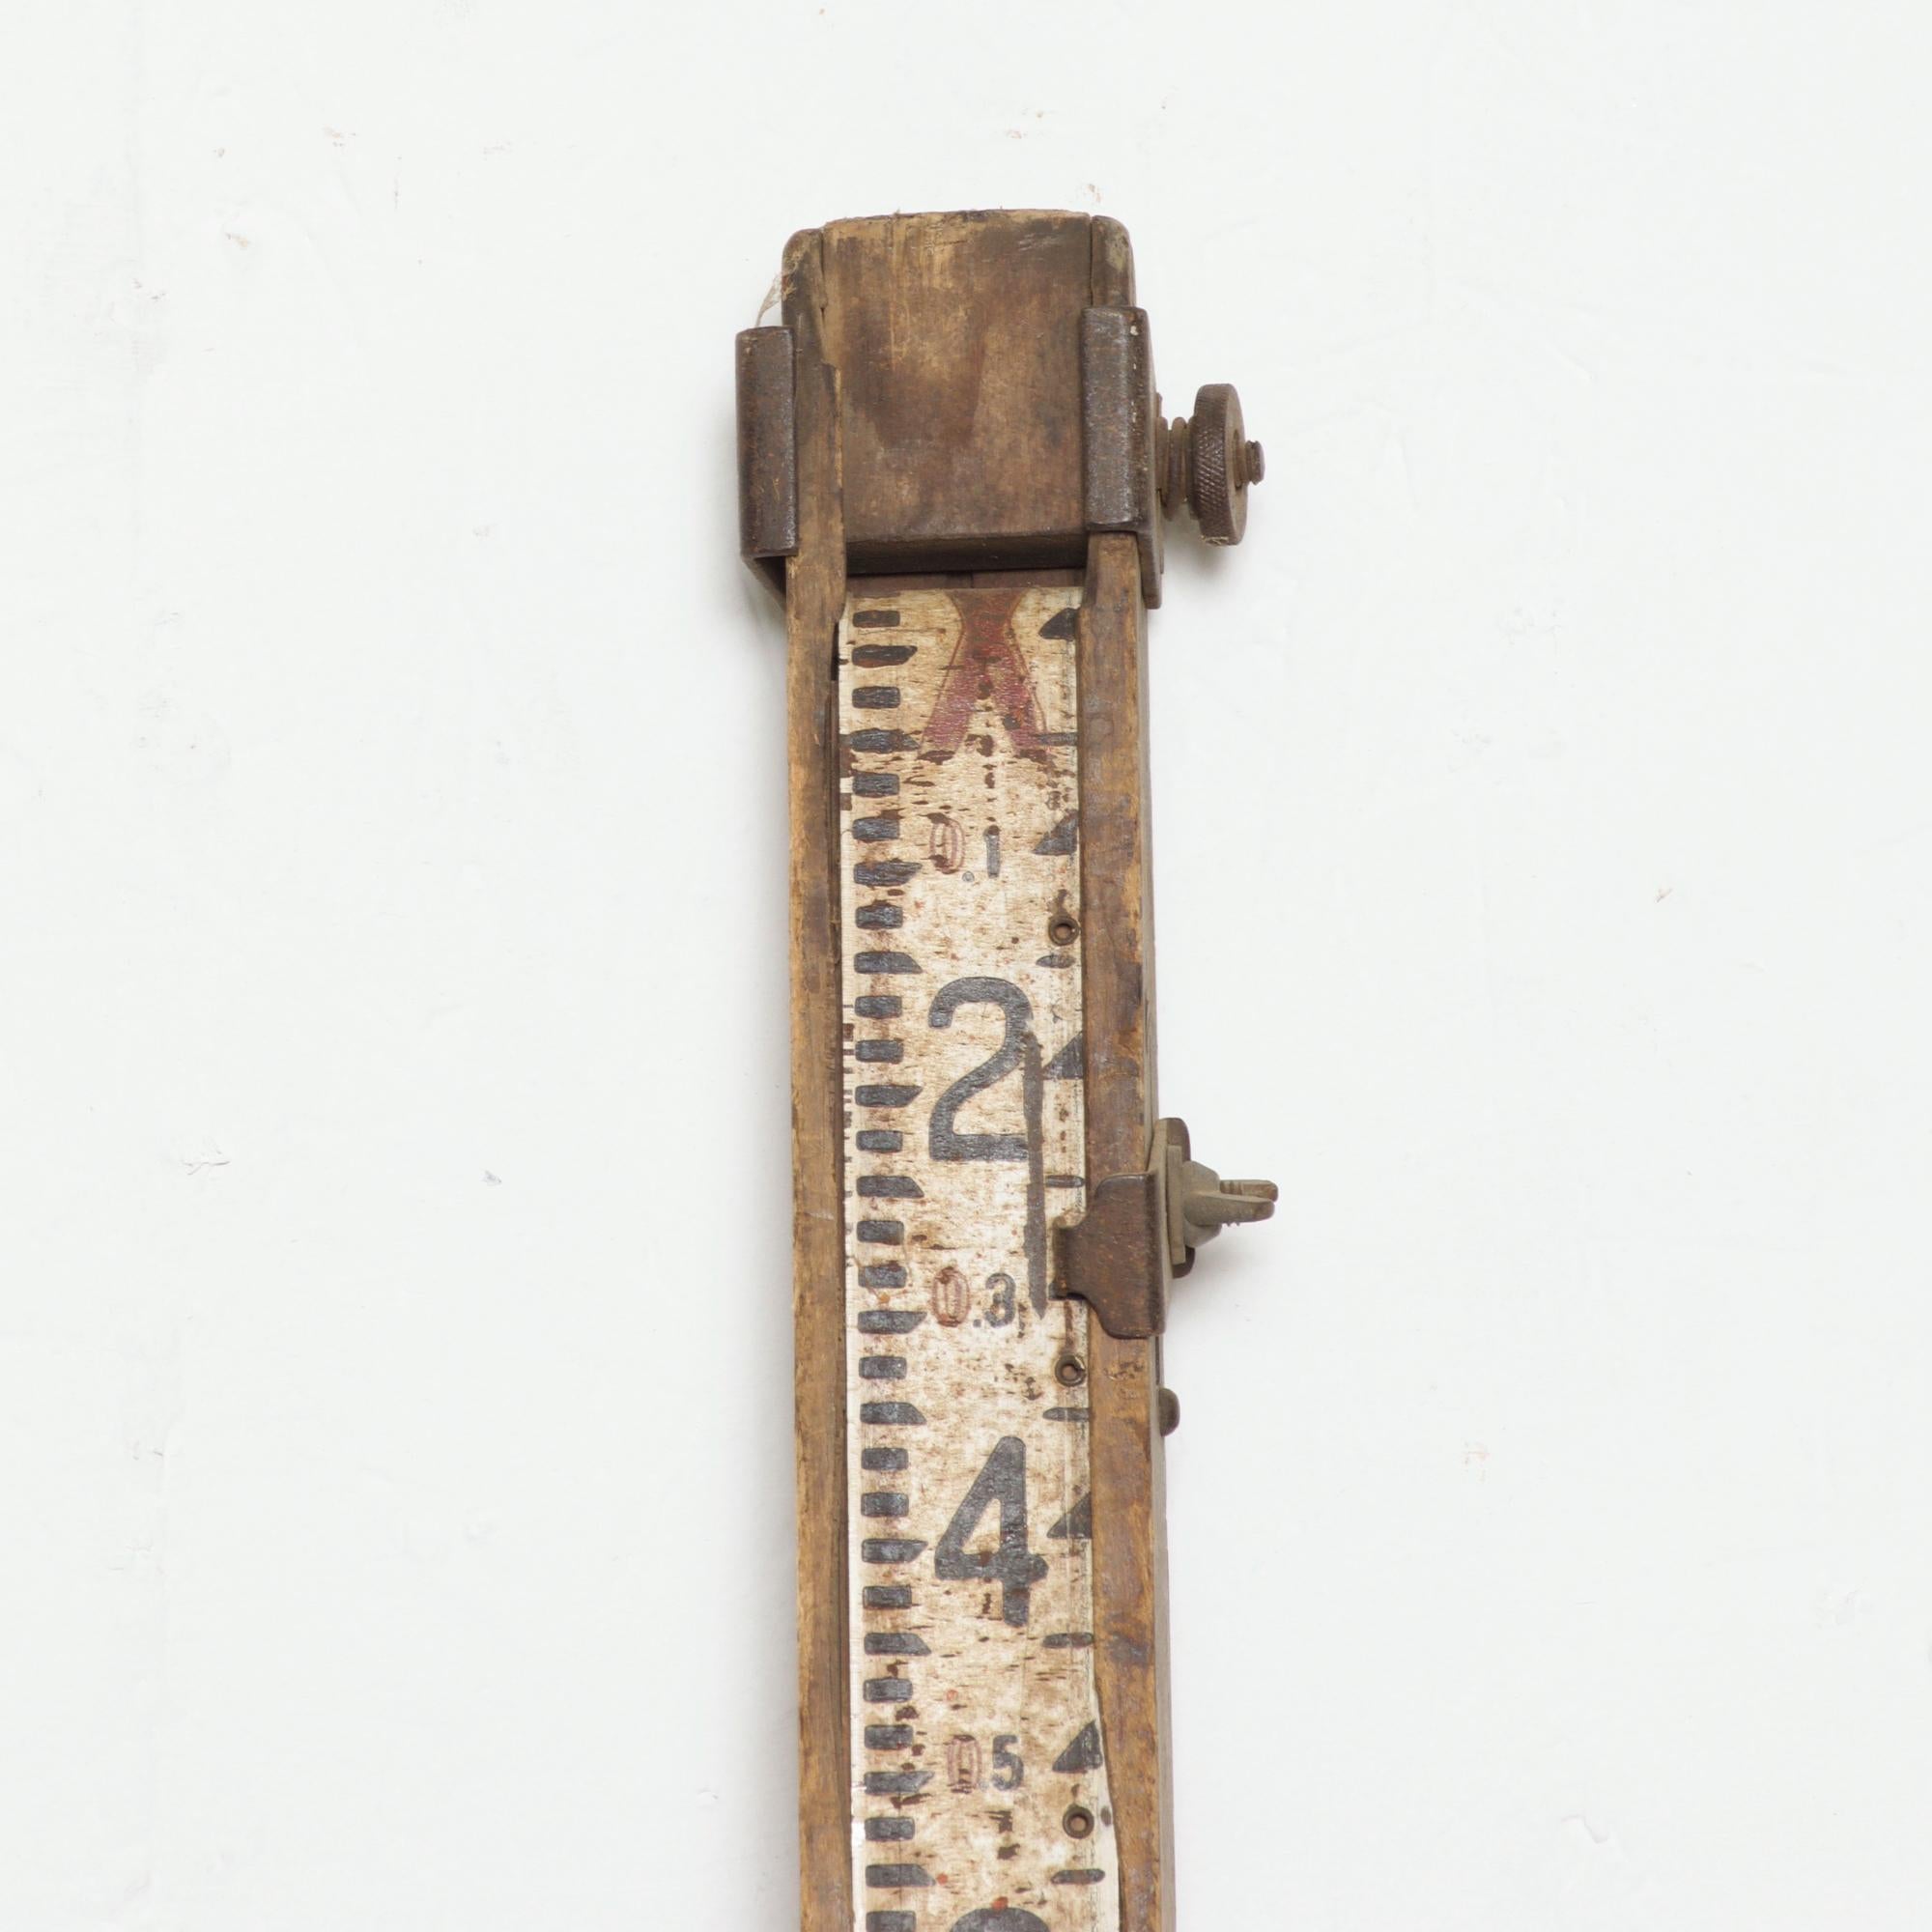 Antique architect's style adjustable extending wood ruler...Easy to read.. You'll love the large type style numbers
Charming patinated metal hinges
Tons of character and history.
Measures: 56